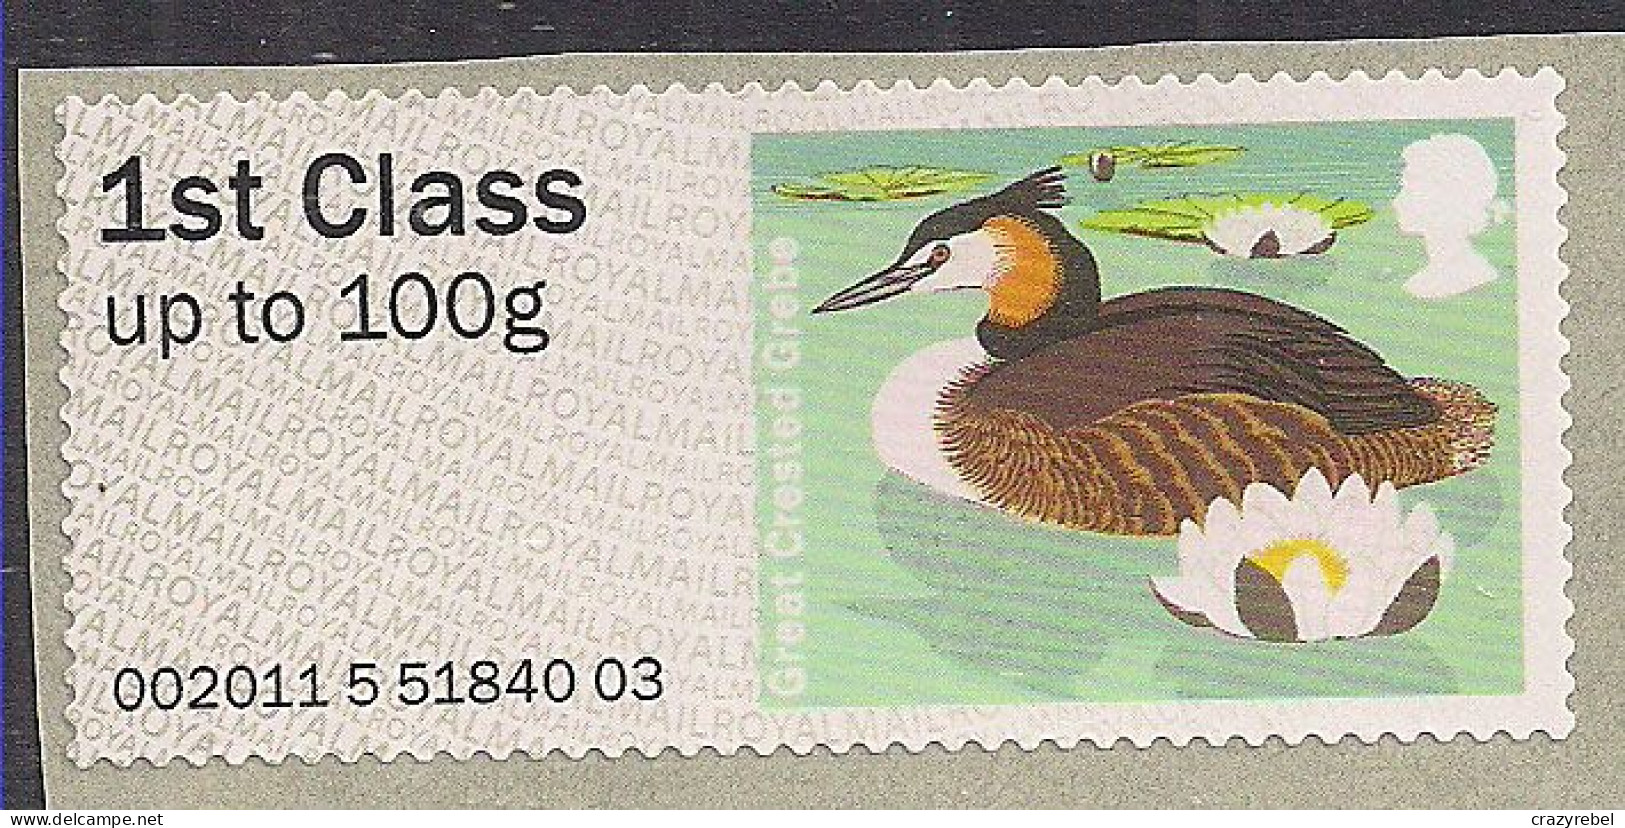 GB 2011 - 14 QE2 1st Great Crested Grebe Post & Go Umm SG FS 16 ( K356 ) - Post & Go Stamps